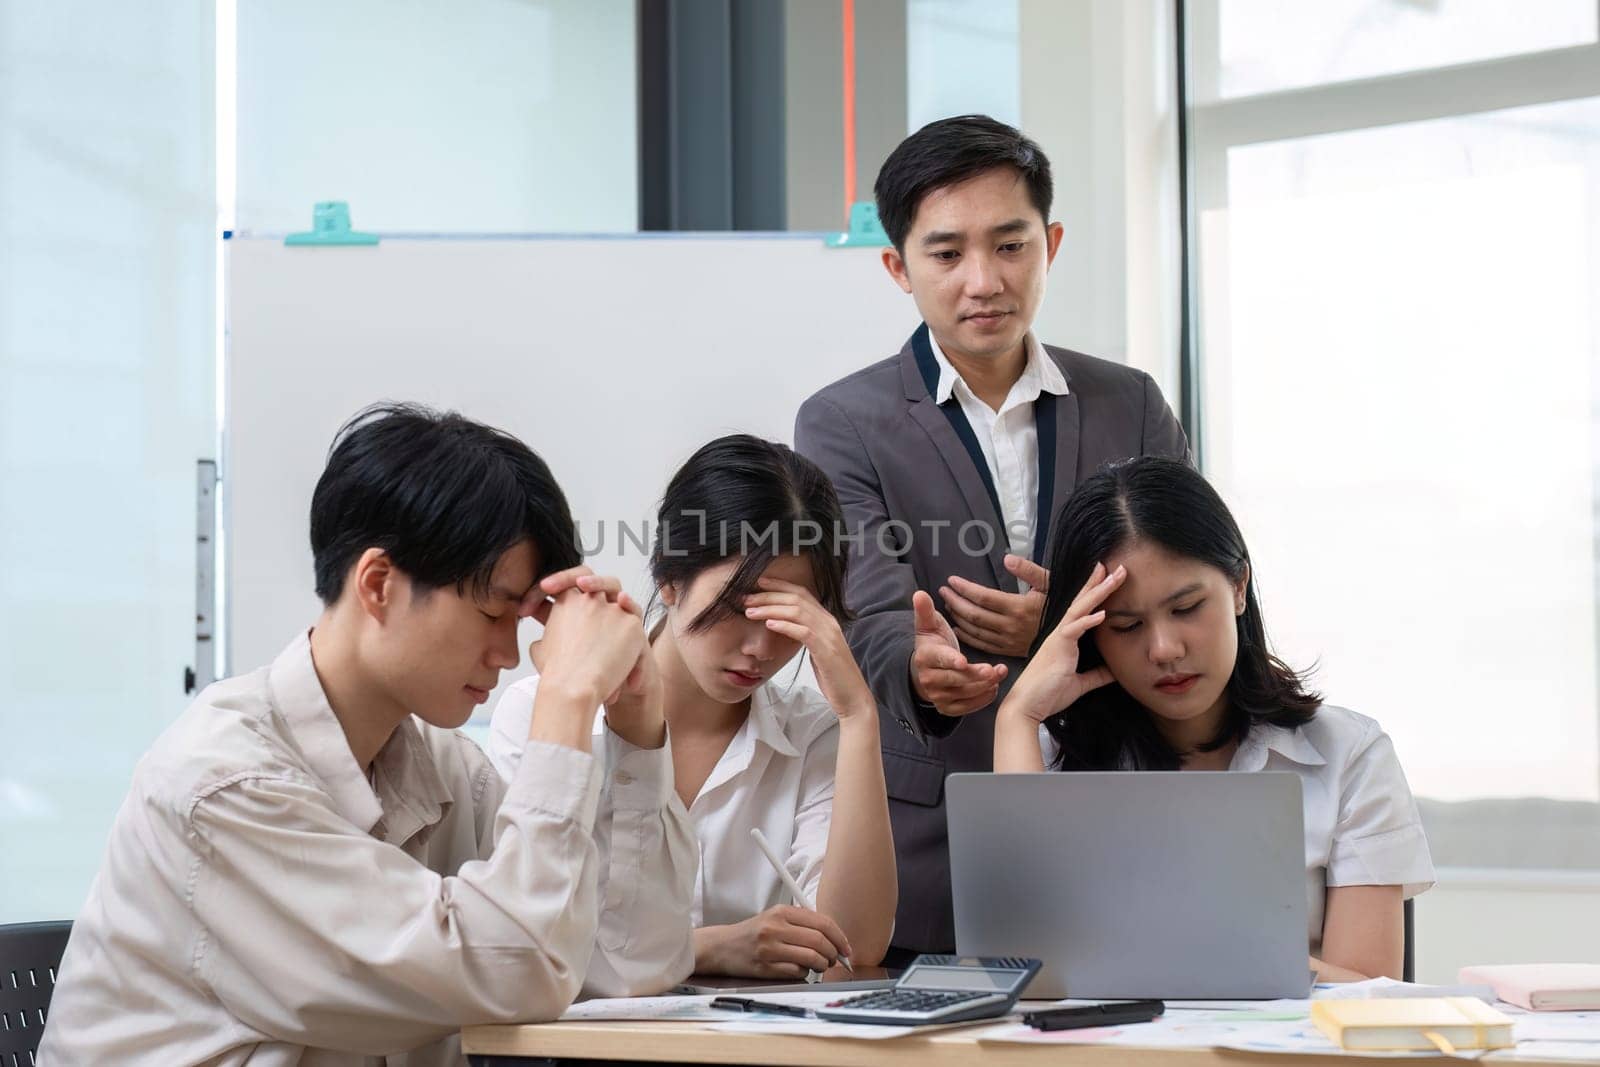 A team of Asian businessmen discusses managing stressful office work in an office conference room..